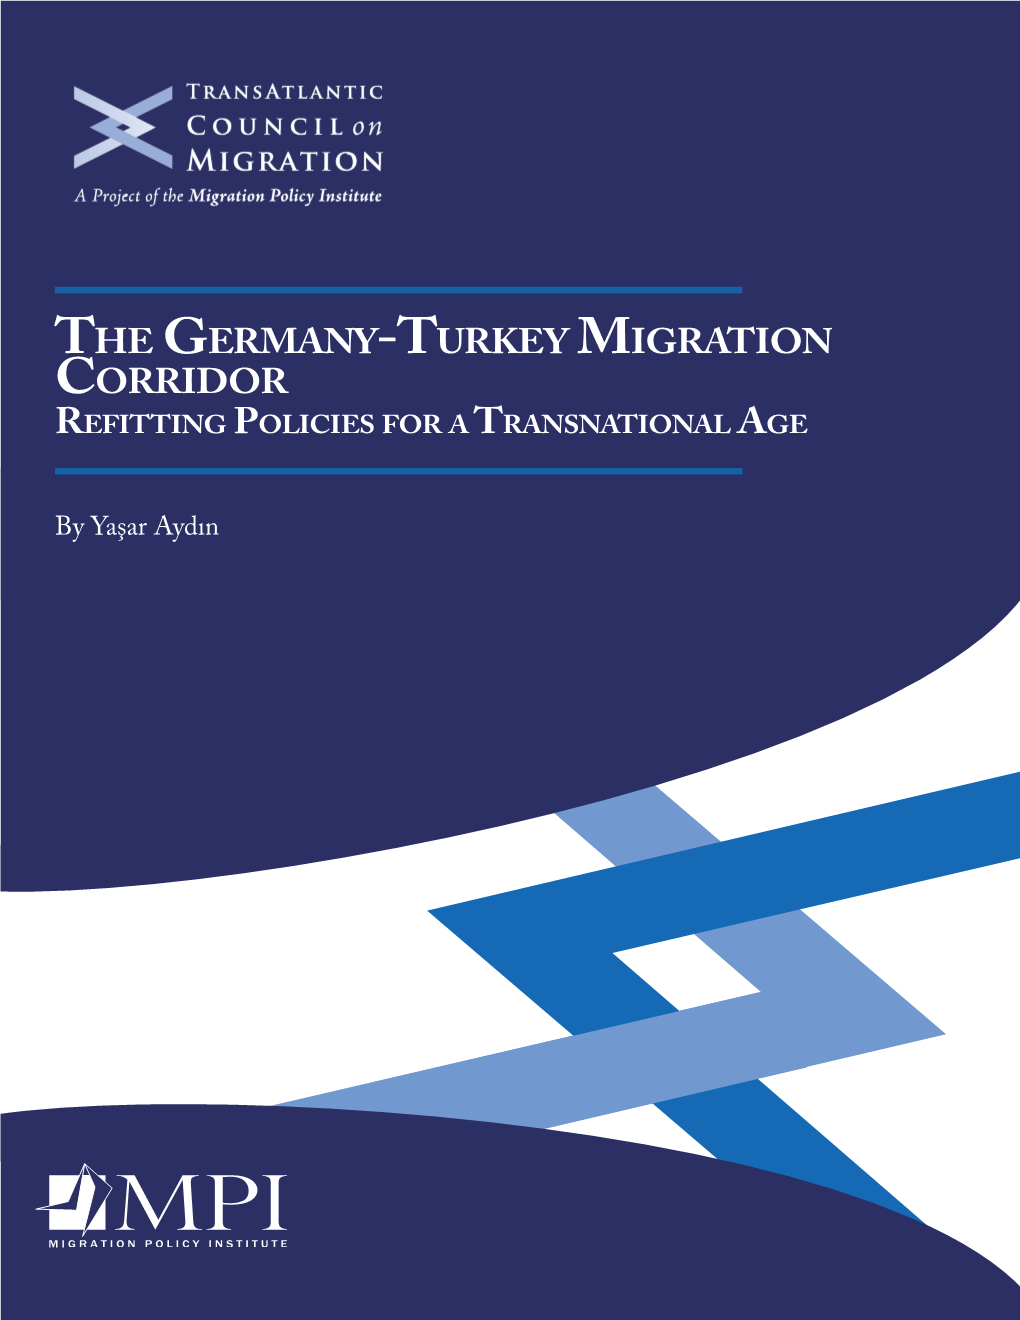 The Germany-Turkey Migration Corridor Refitting Policies for a Transnational Age